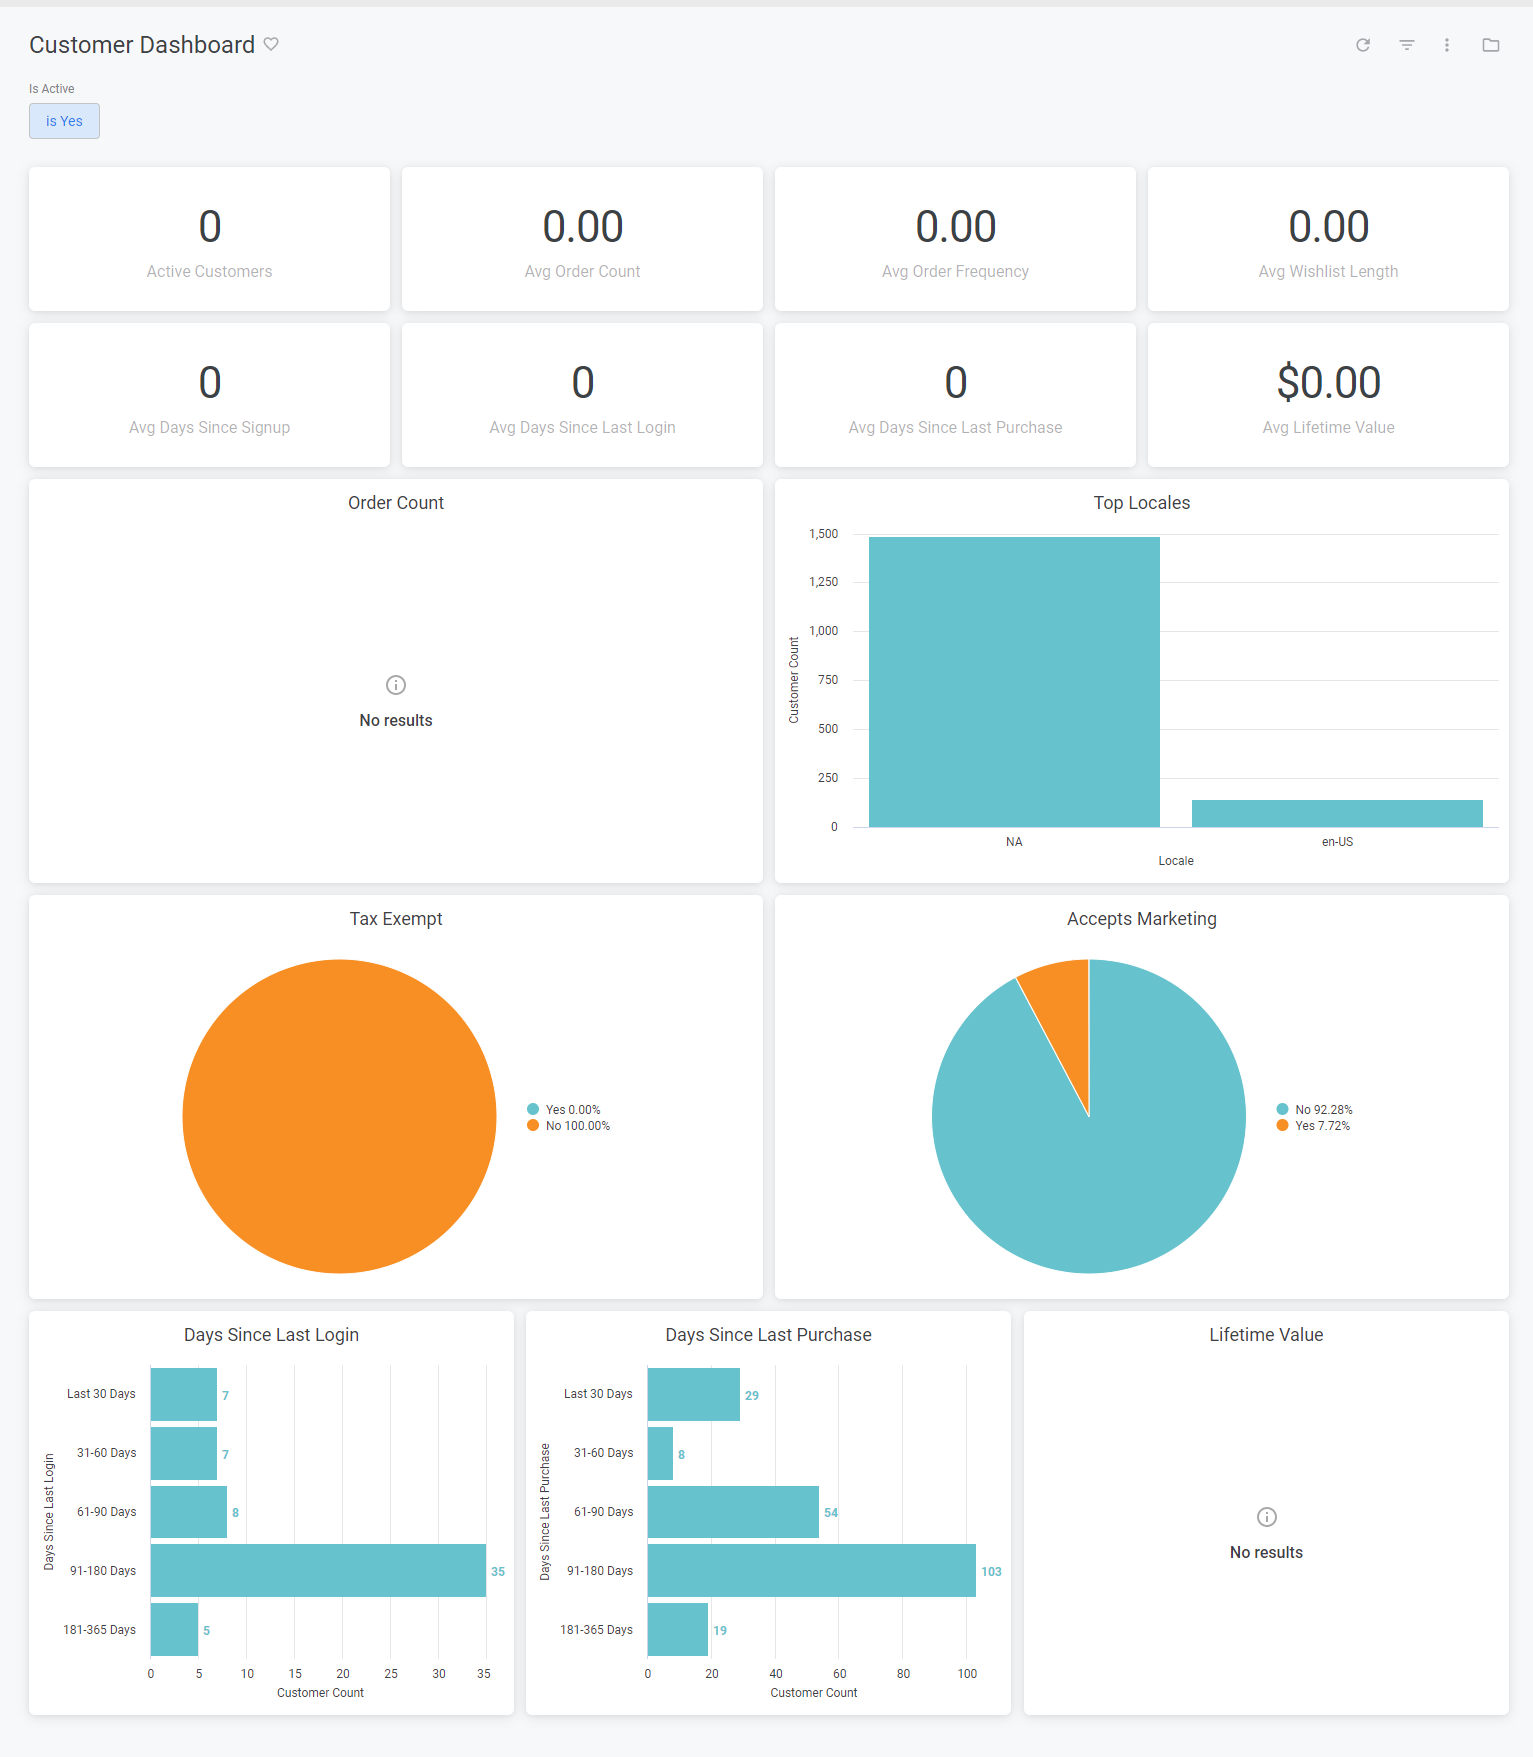 Example of the Customer dashboard with total values, bar graphs, and pie charts